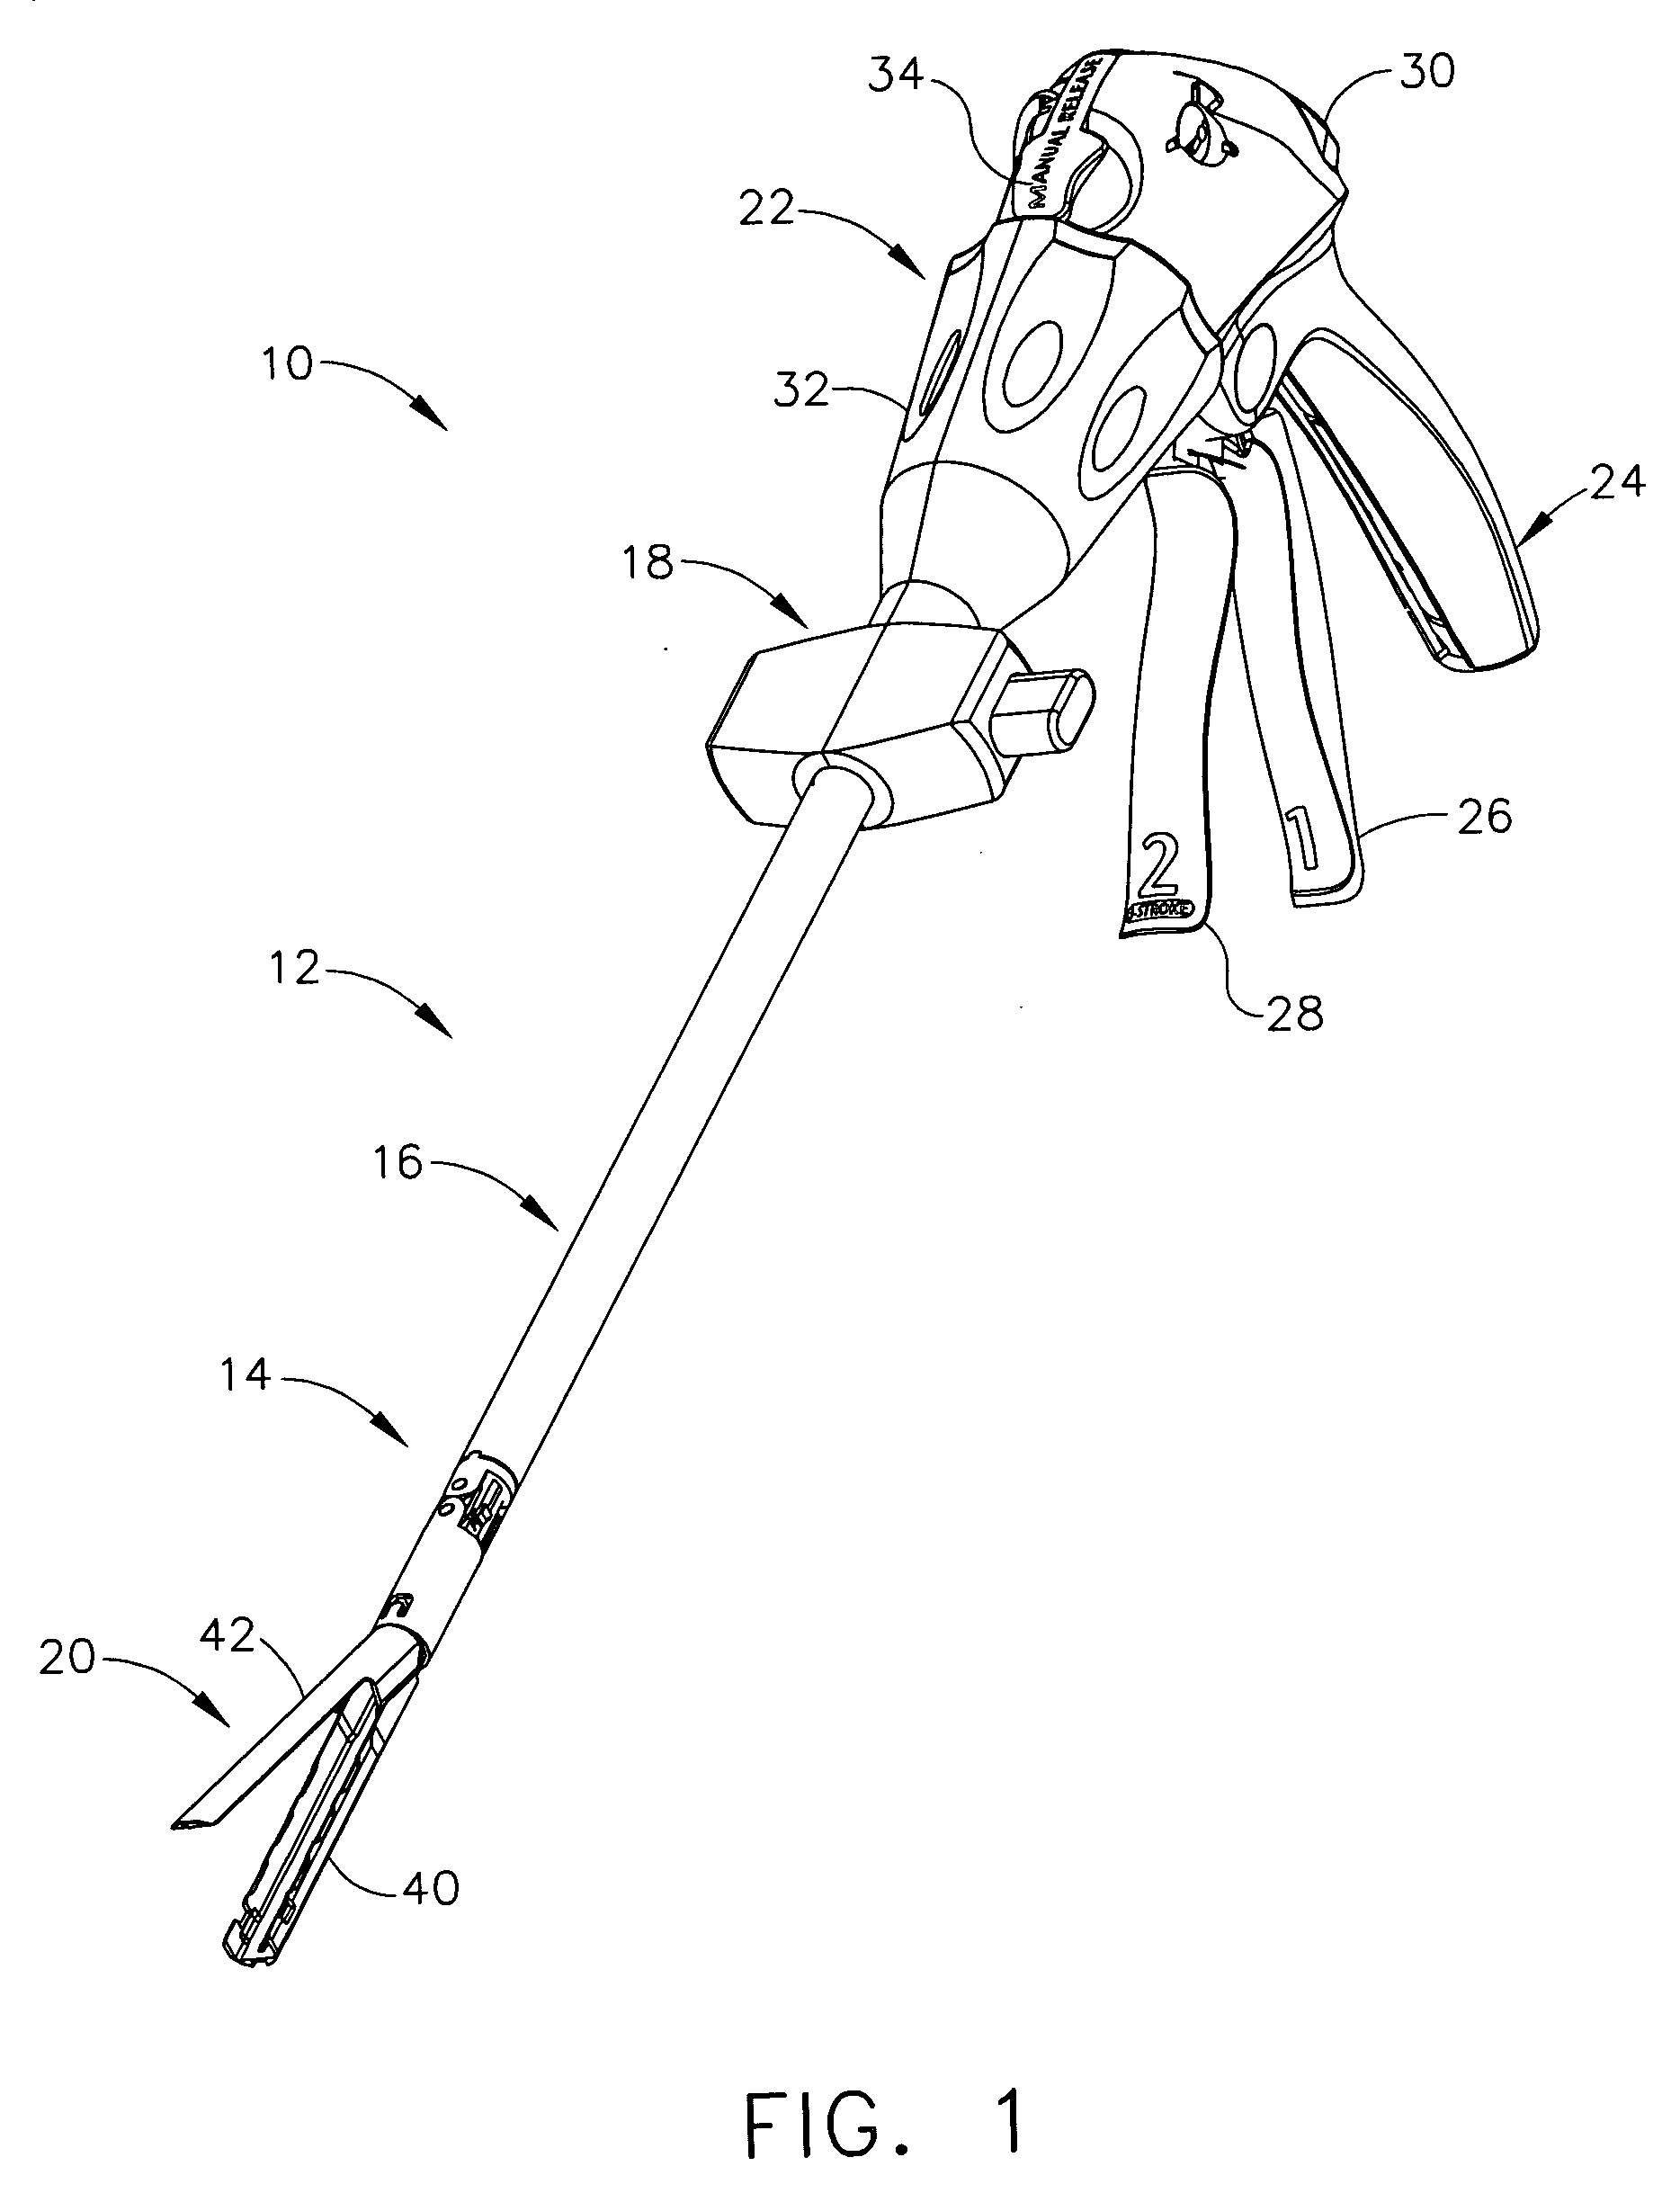 Surgical instrument with an articulating shaft locking mechanism